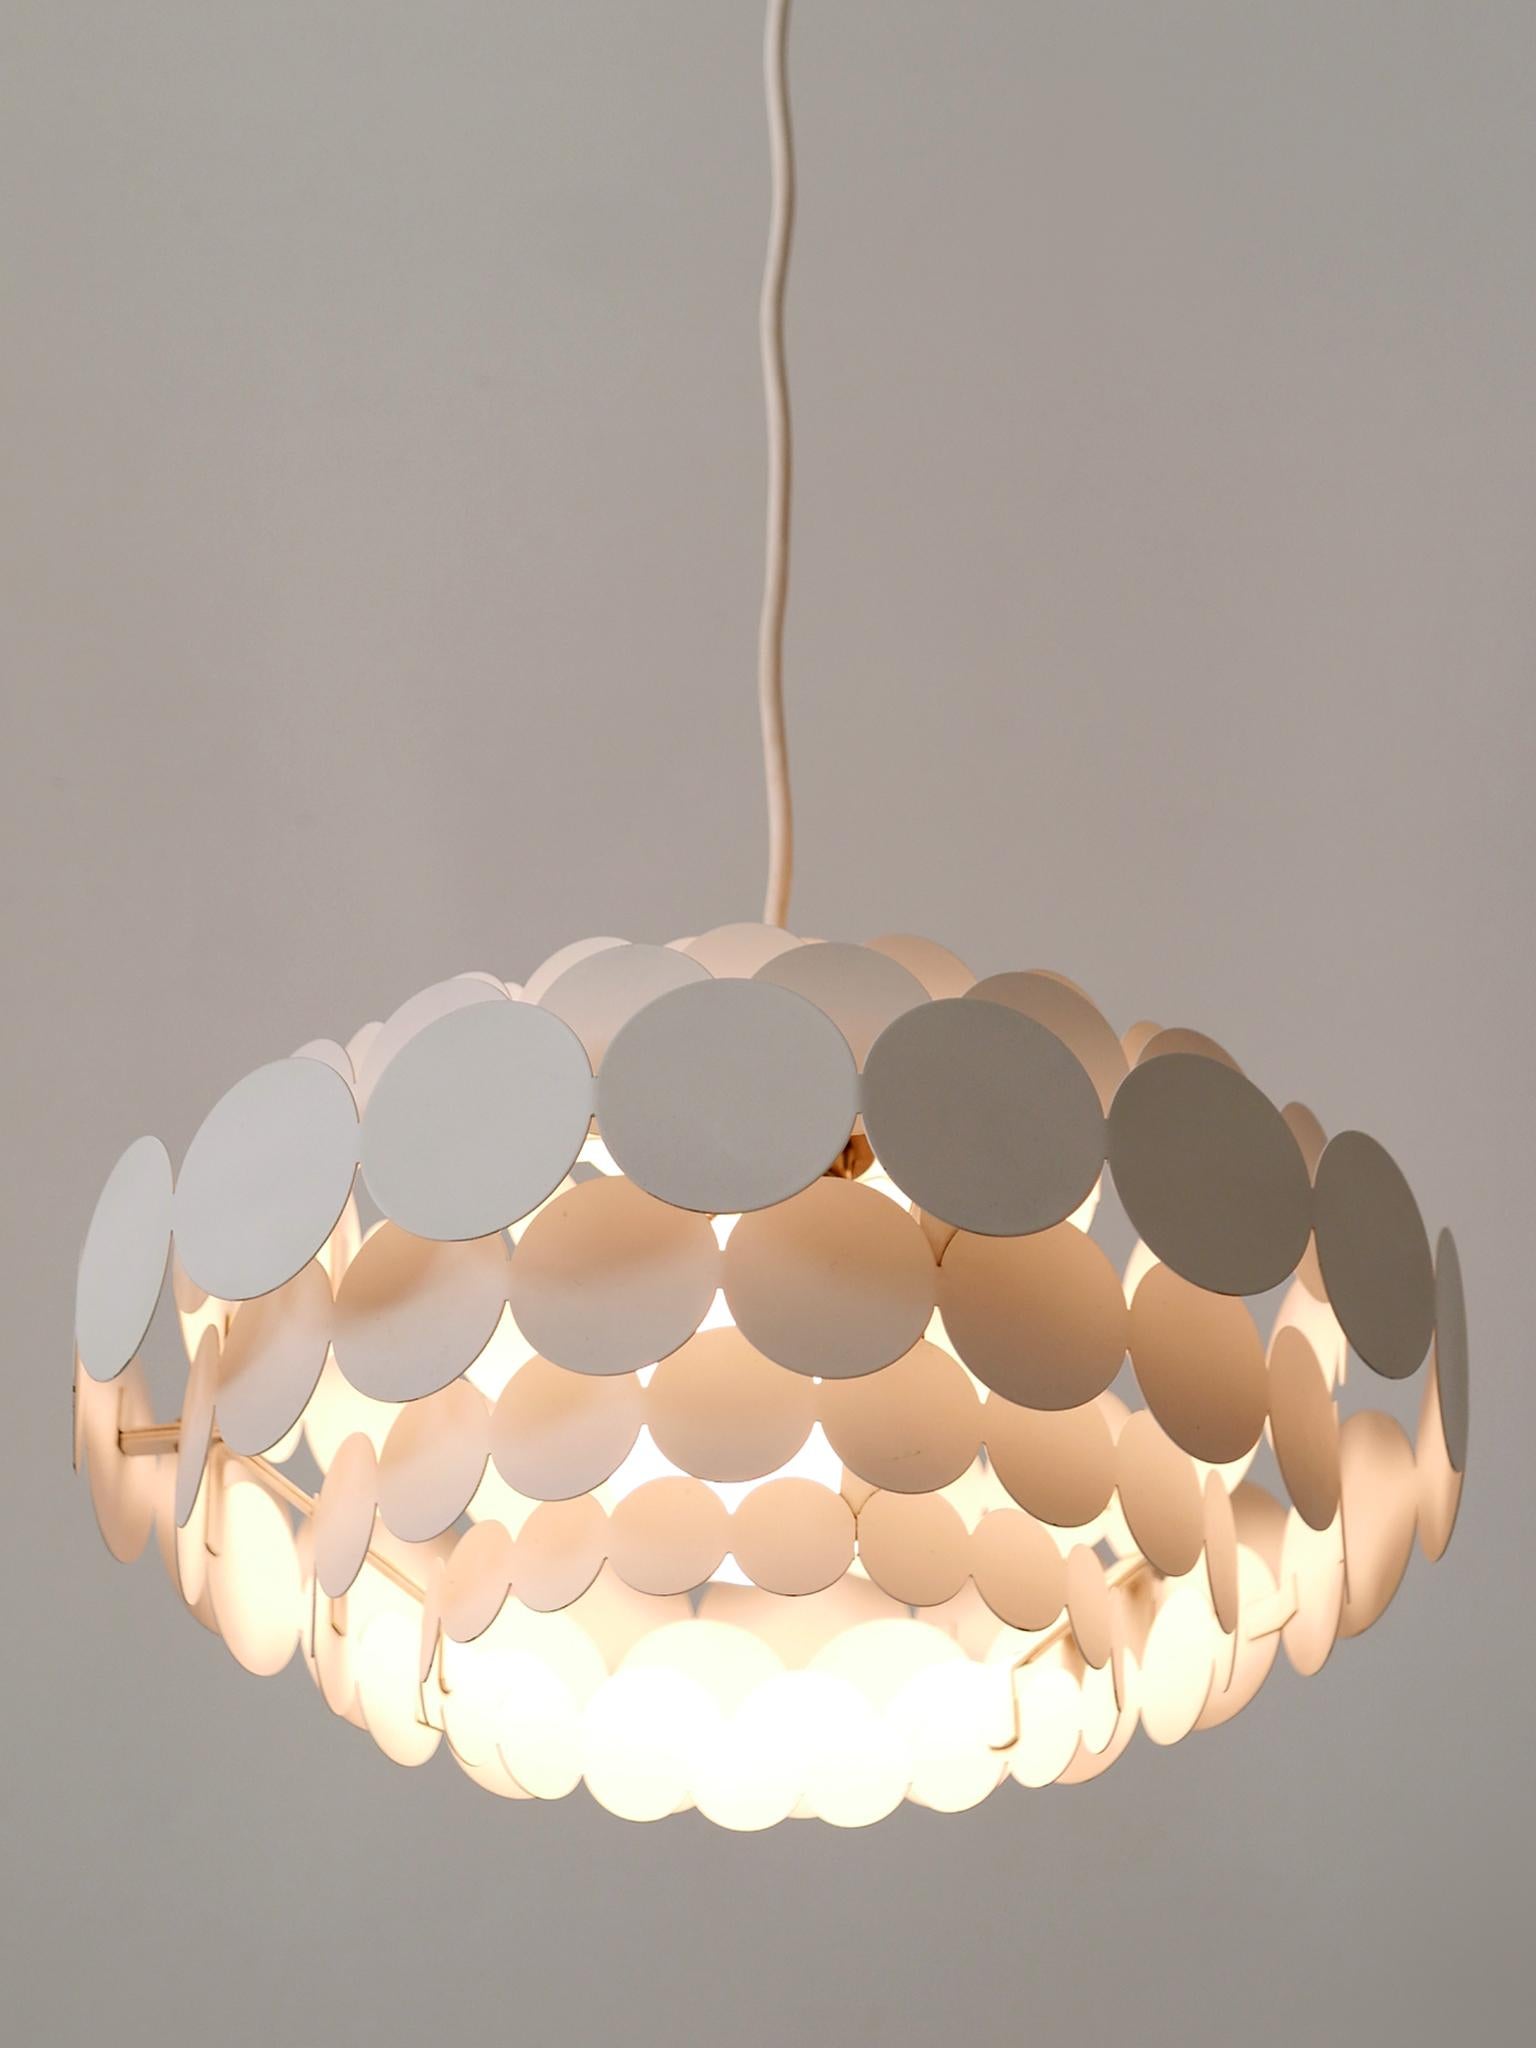 Lovely Mid-Century Modern Pendant Lamp or Hanging Light by Doria Germany 1960s For Sale 9